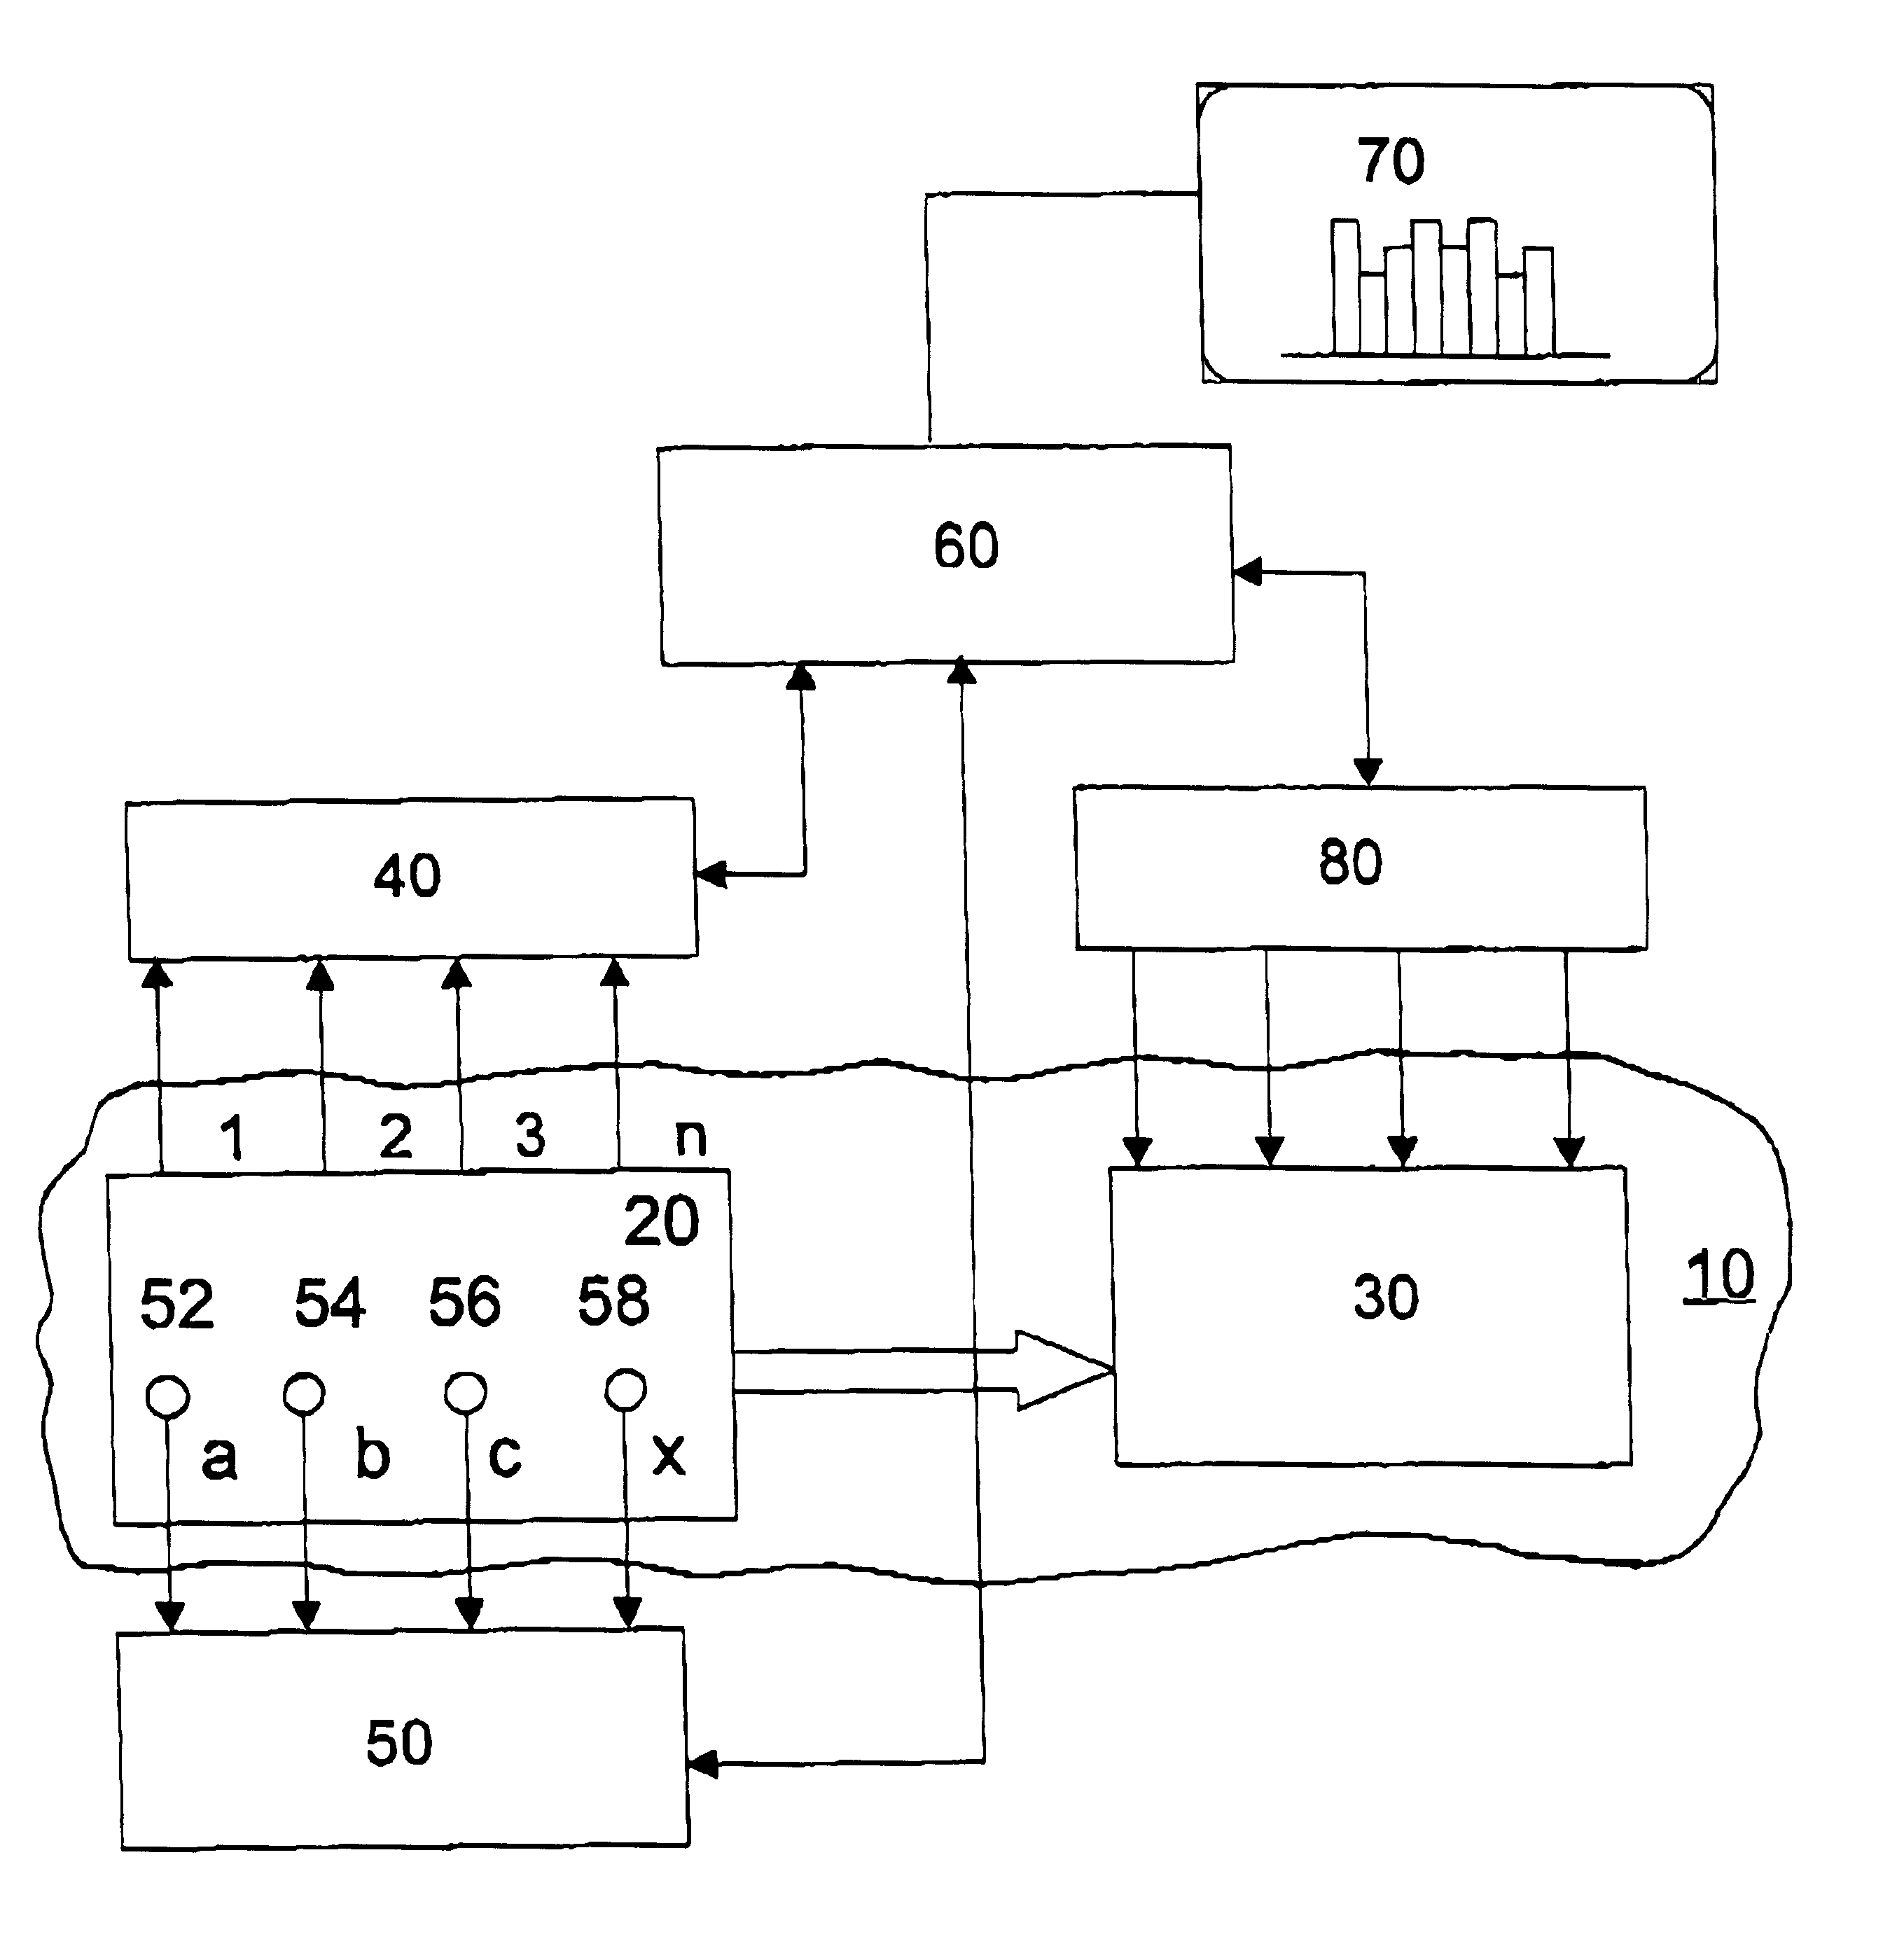 Method and device for controlling an essentially continuous process